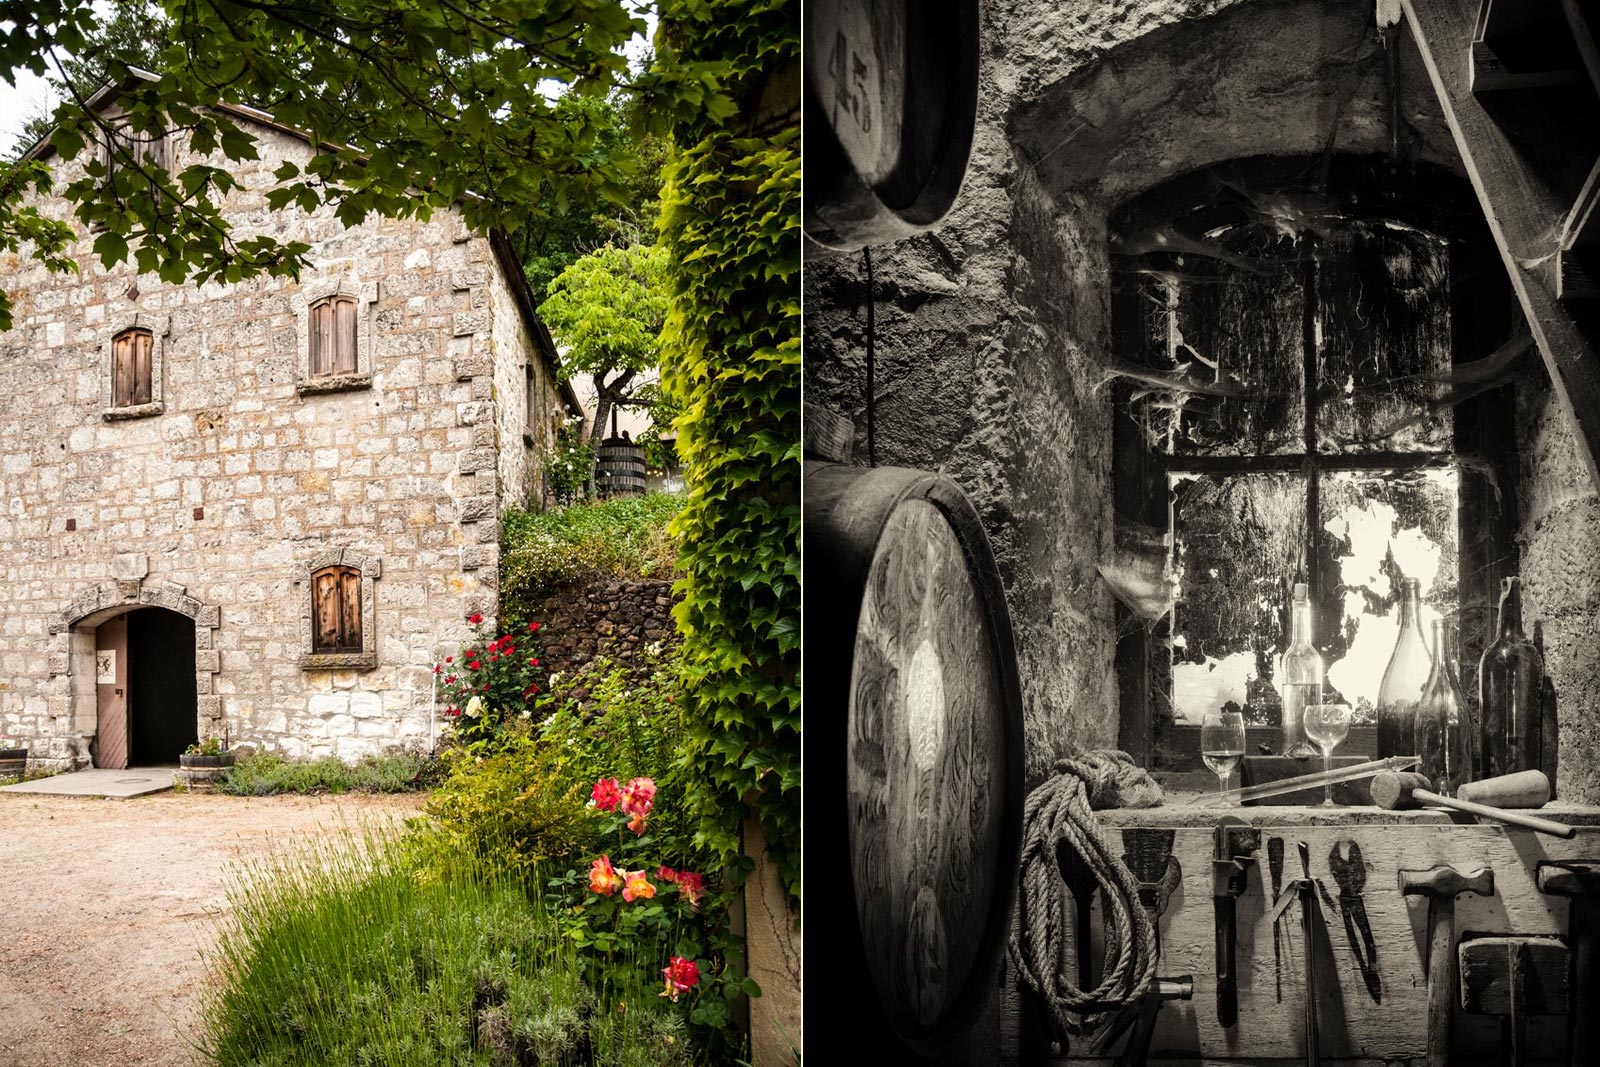 Old Stone Winery